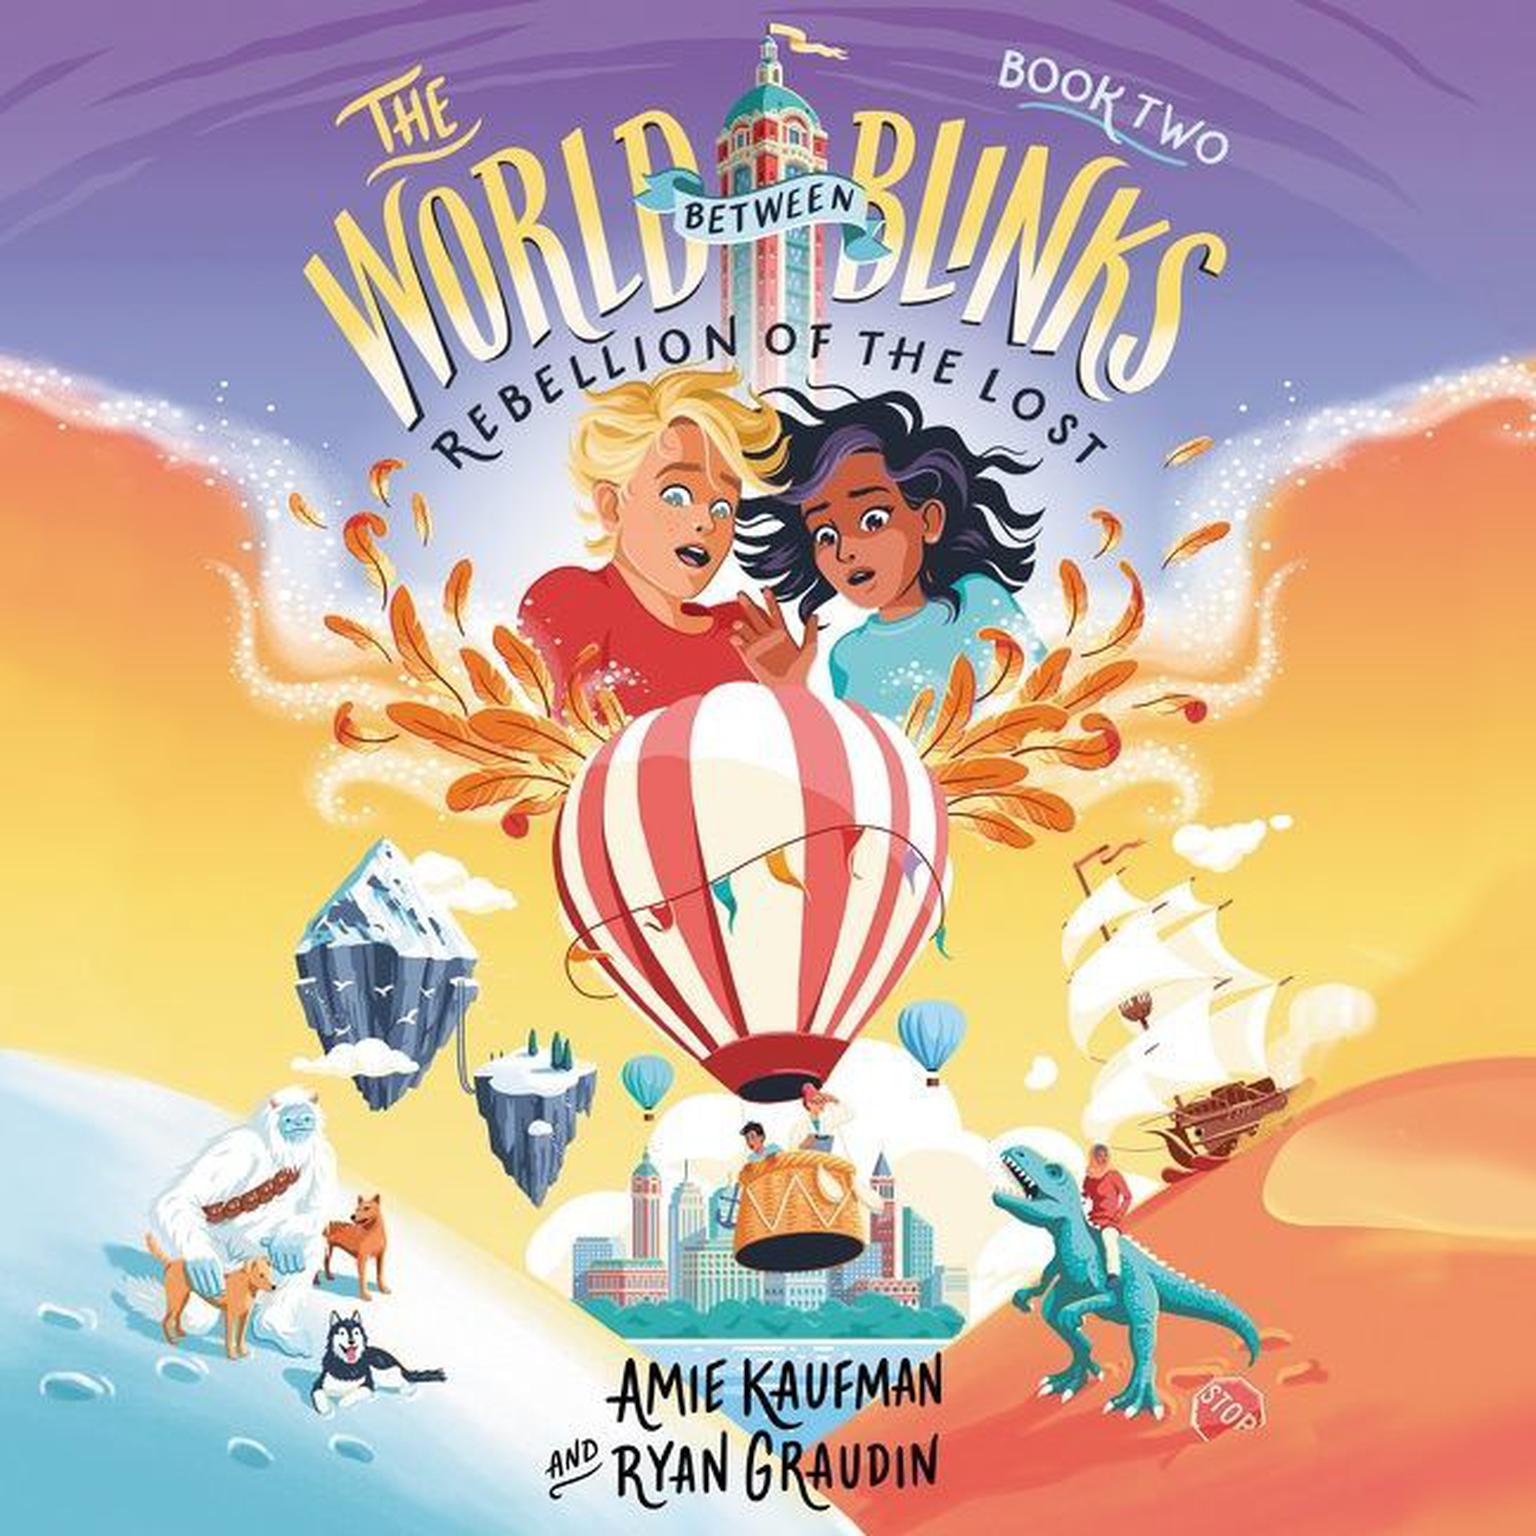 The World Between Blinks #2: Rebellion of the Lost Audiobook, by Amie Kaufman